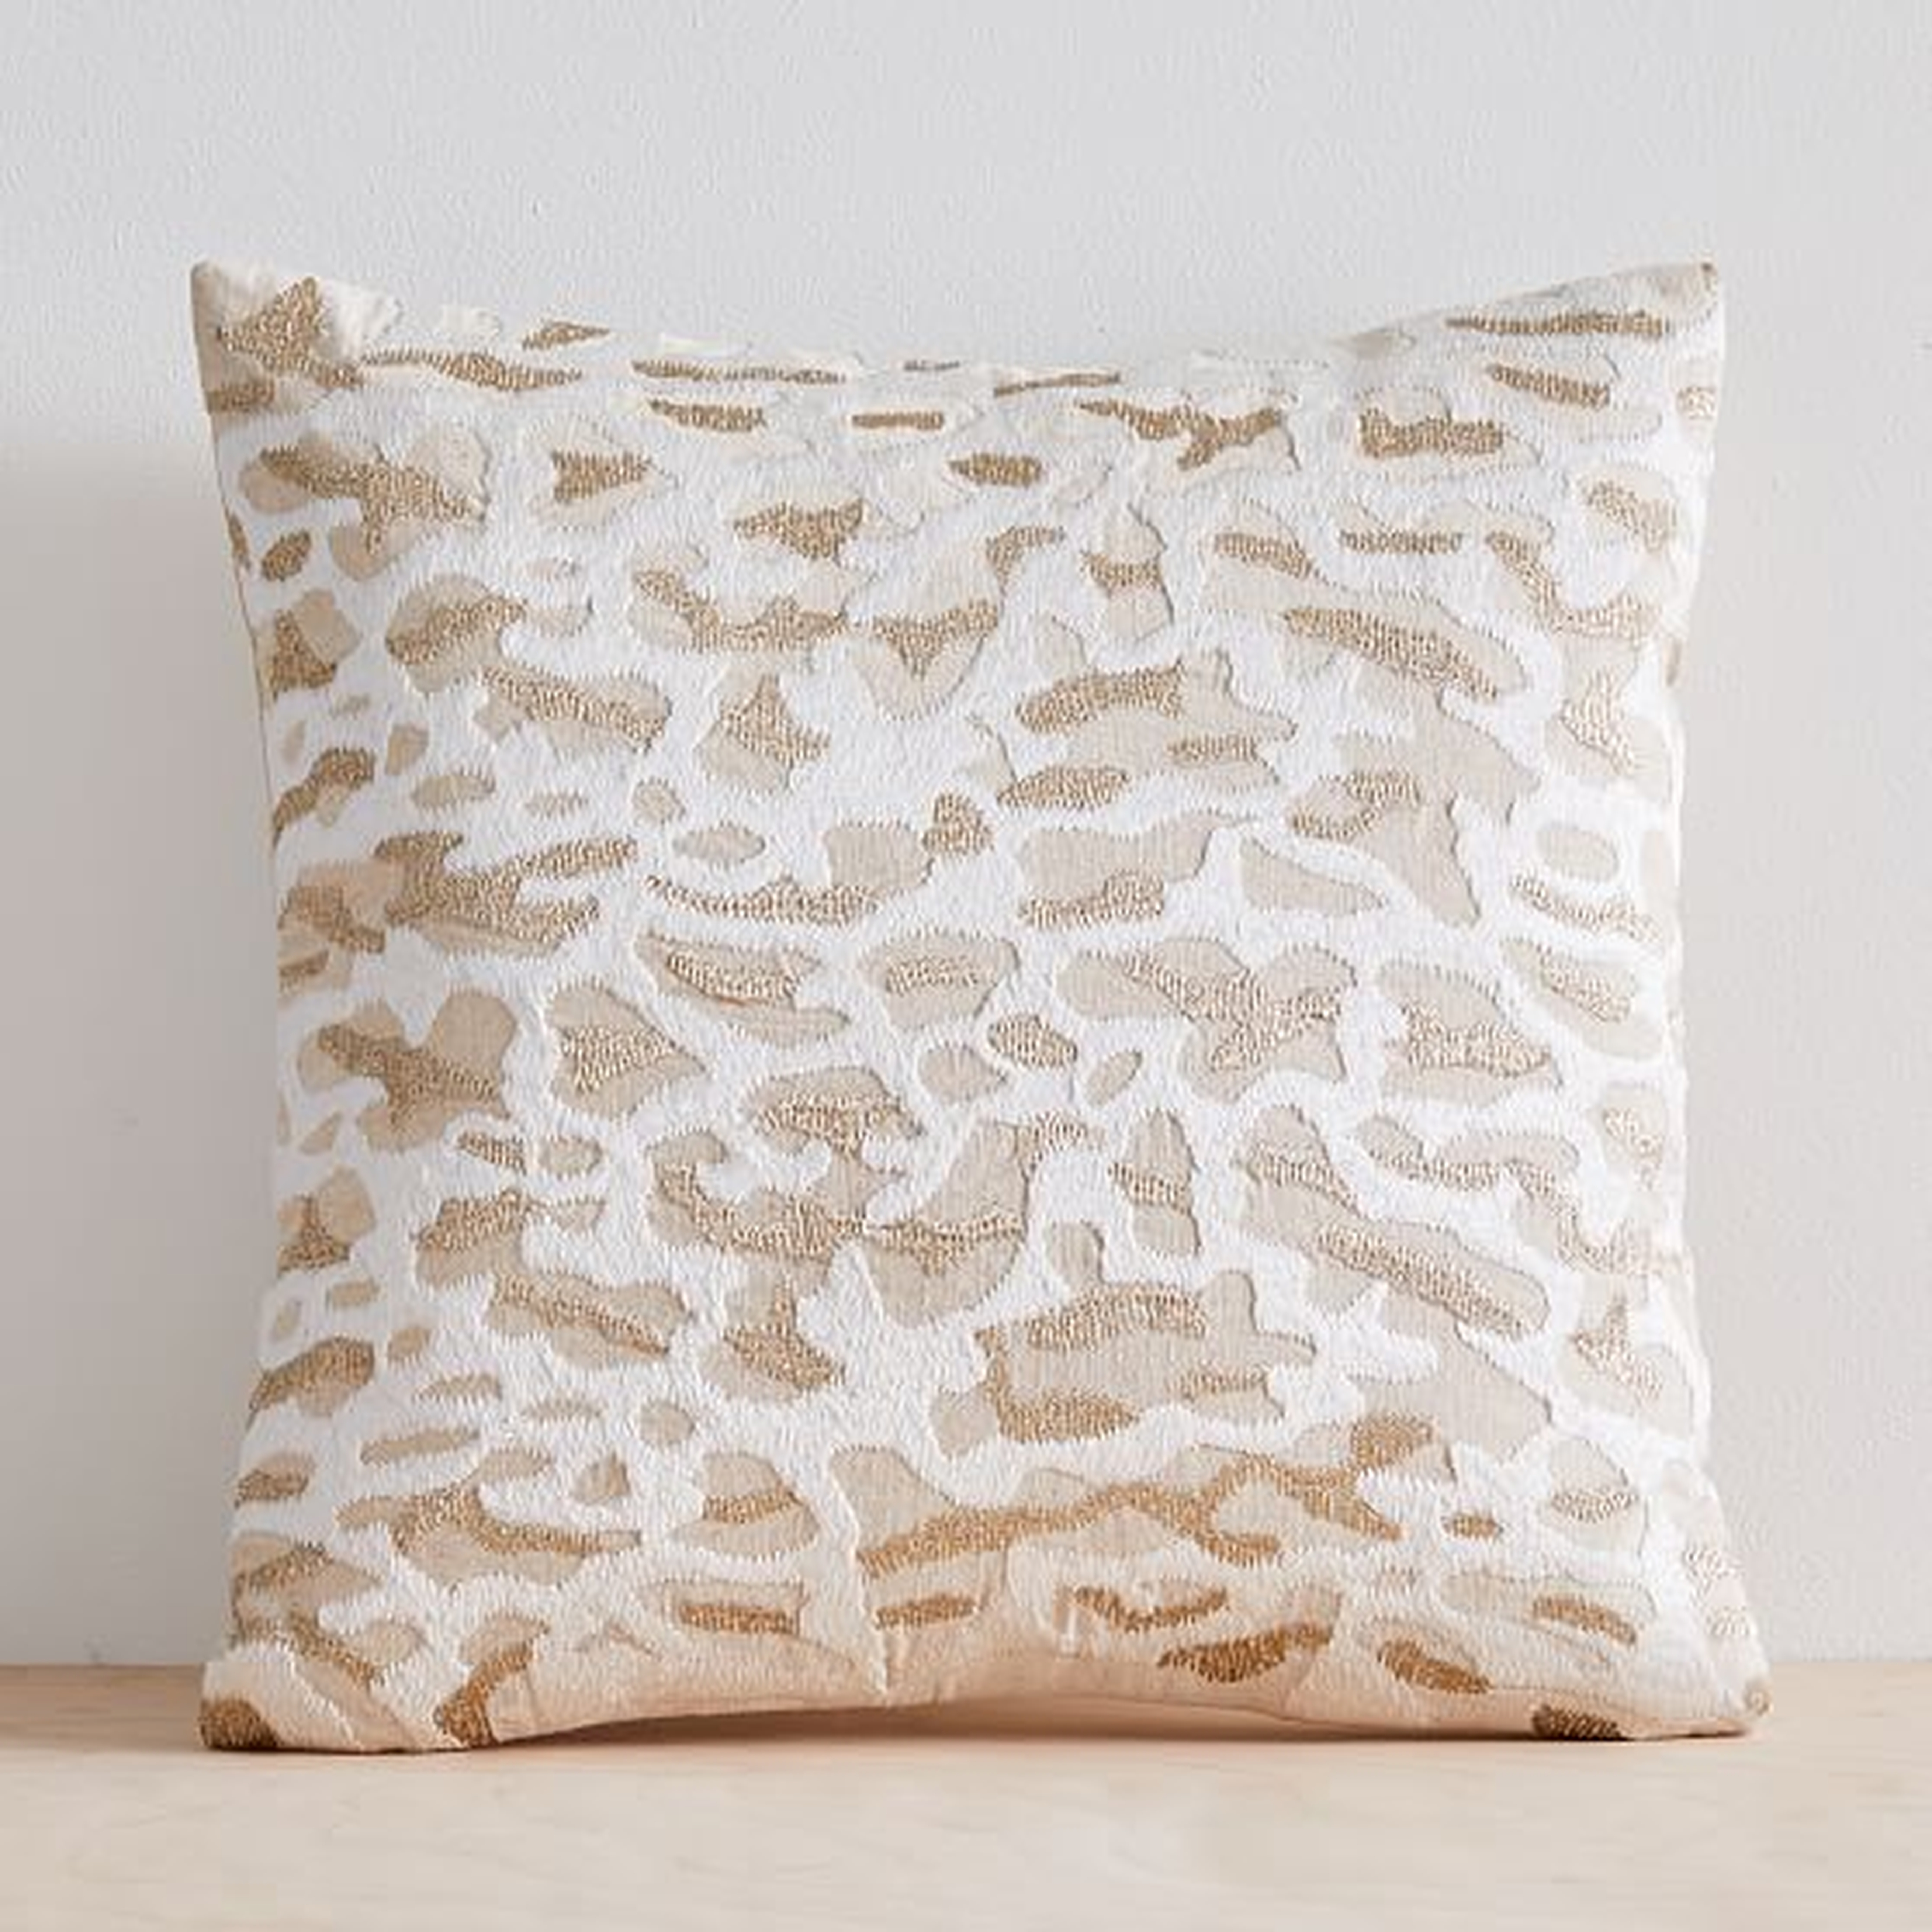 Embroidered Animal Print Pillow Cover, 20"x20", Metallic Gold - West Elm